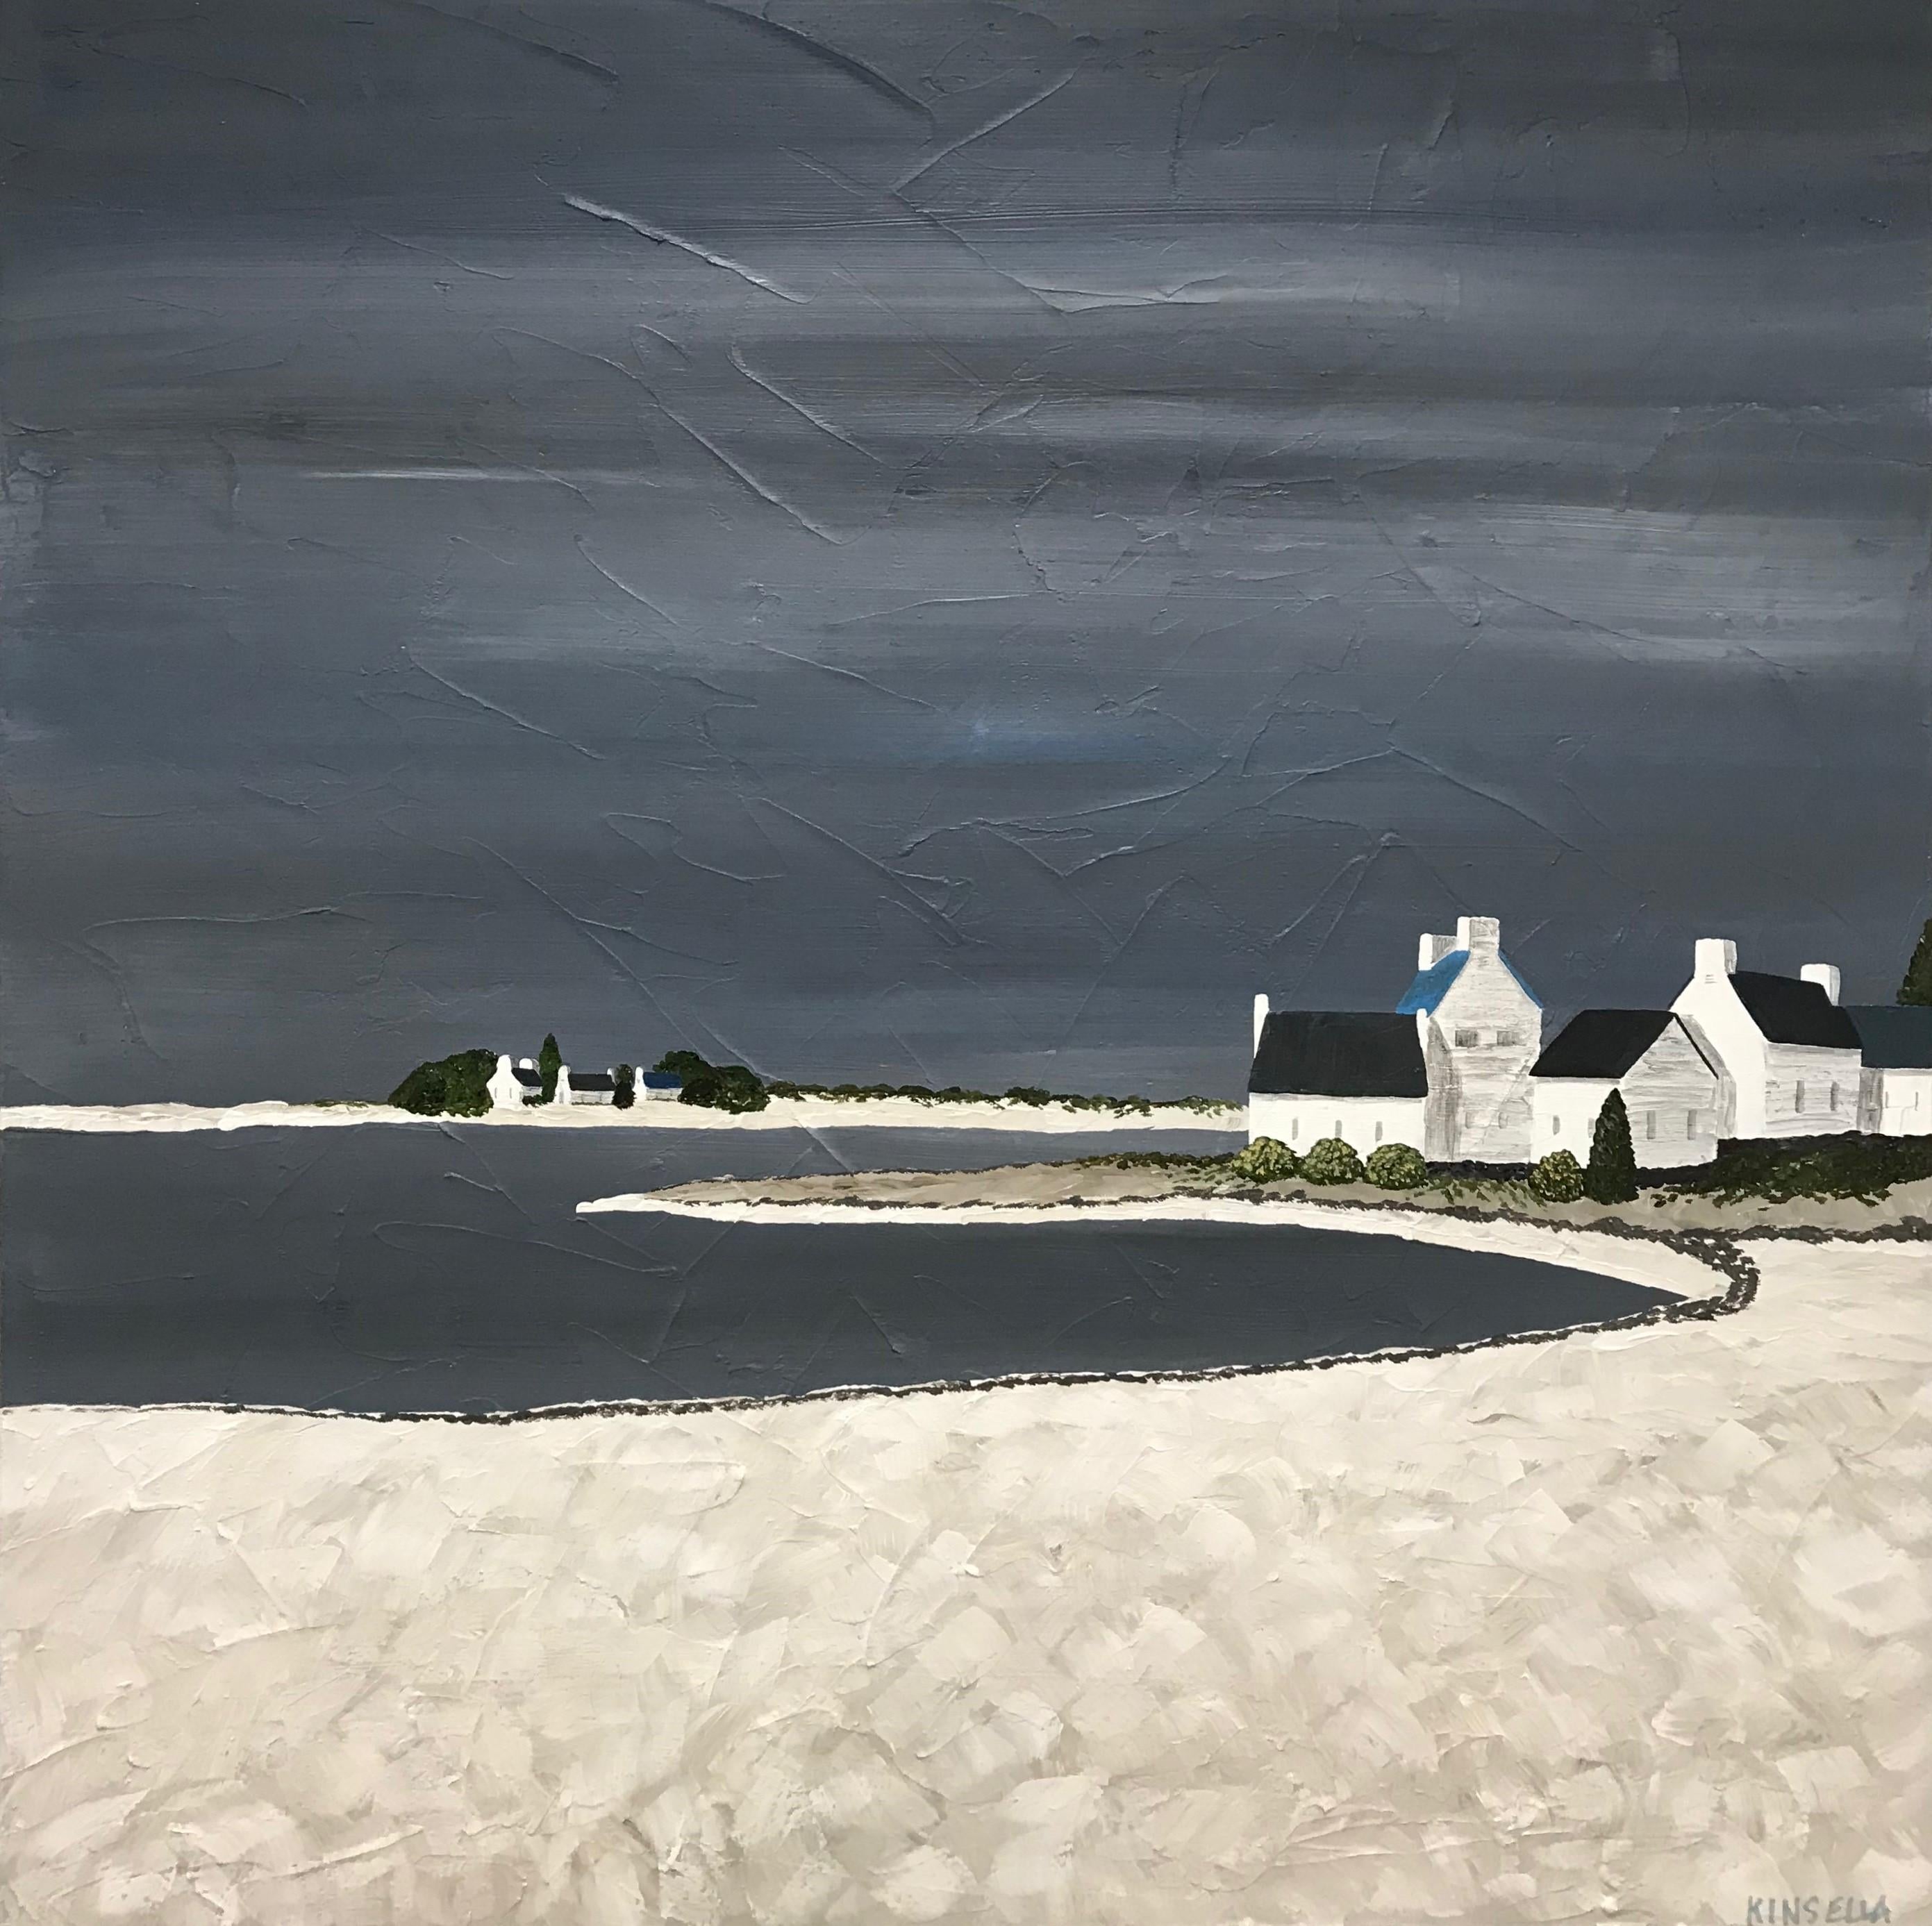 'Delicate Light' is a contemporary square-shaped medium size seascape painting created by American artist Susan Kinsella in 2018. Featuring a beautifully contrasting palette made of dark grey, beige and dark green, the painting showcases a perfectly